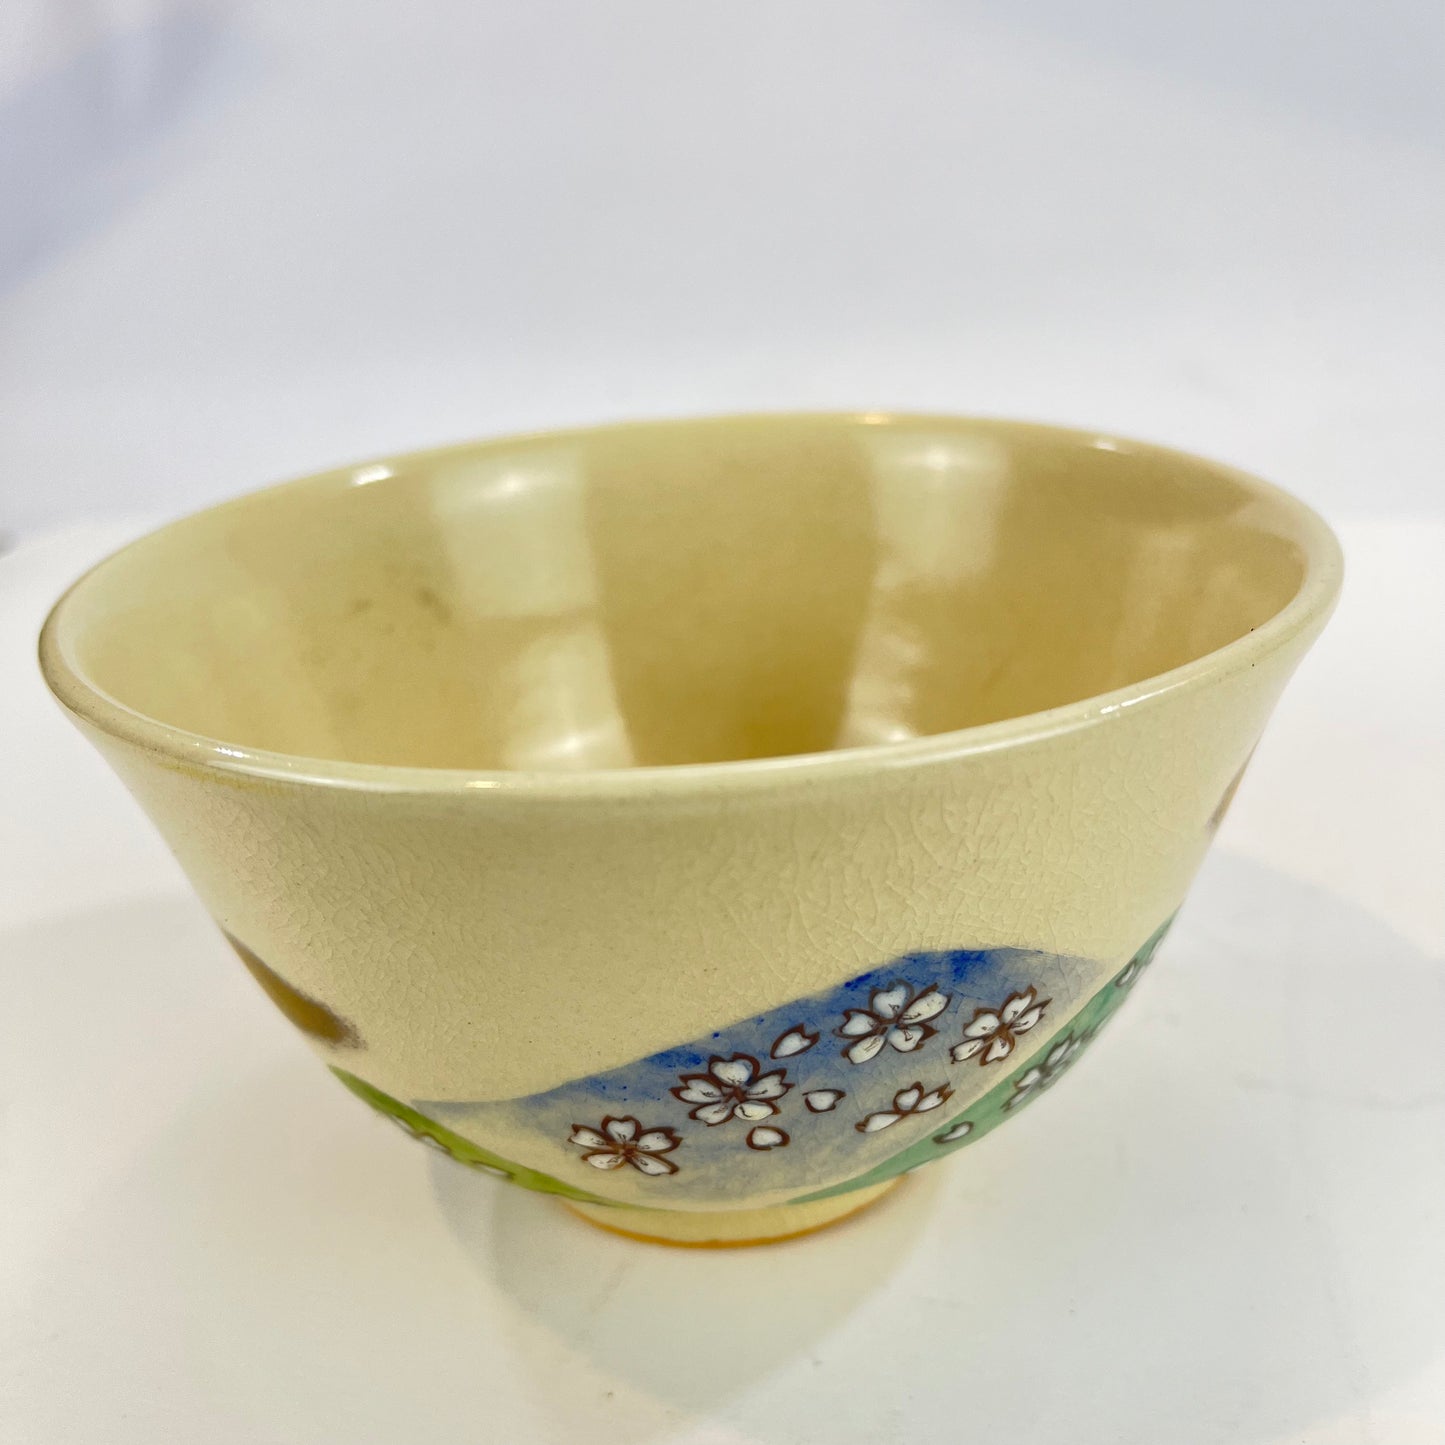 Signed Tea Ceremony Chawan Tea Bowl w/ Gold Clouds & Multicolored Hills